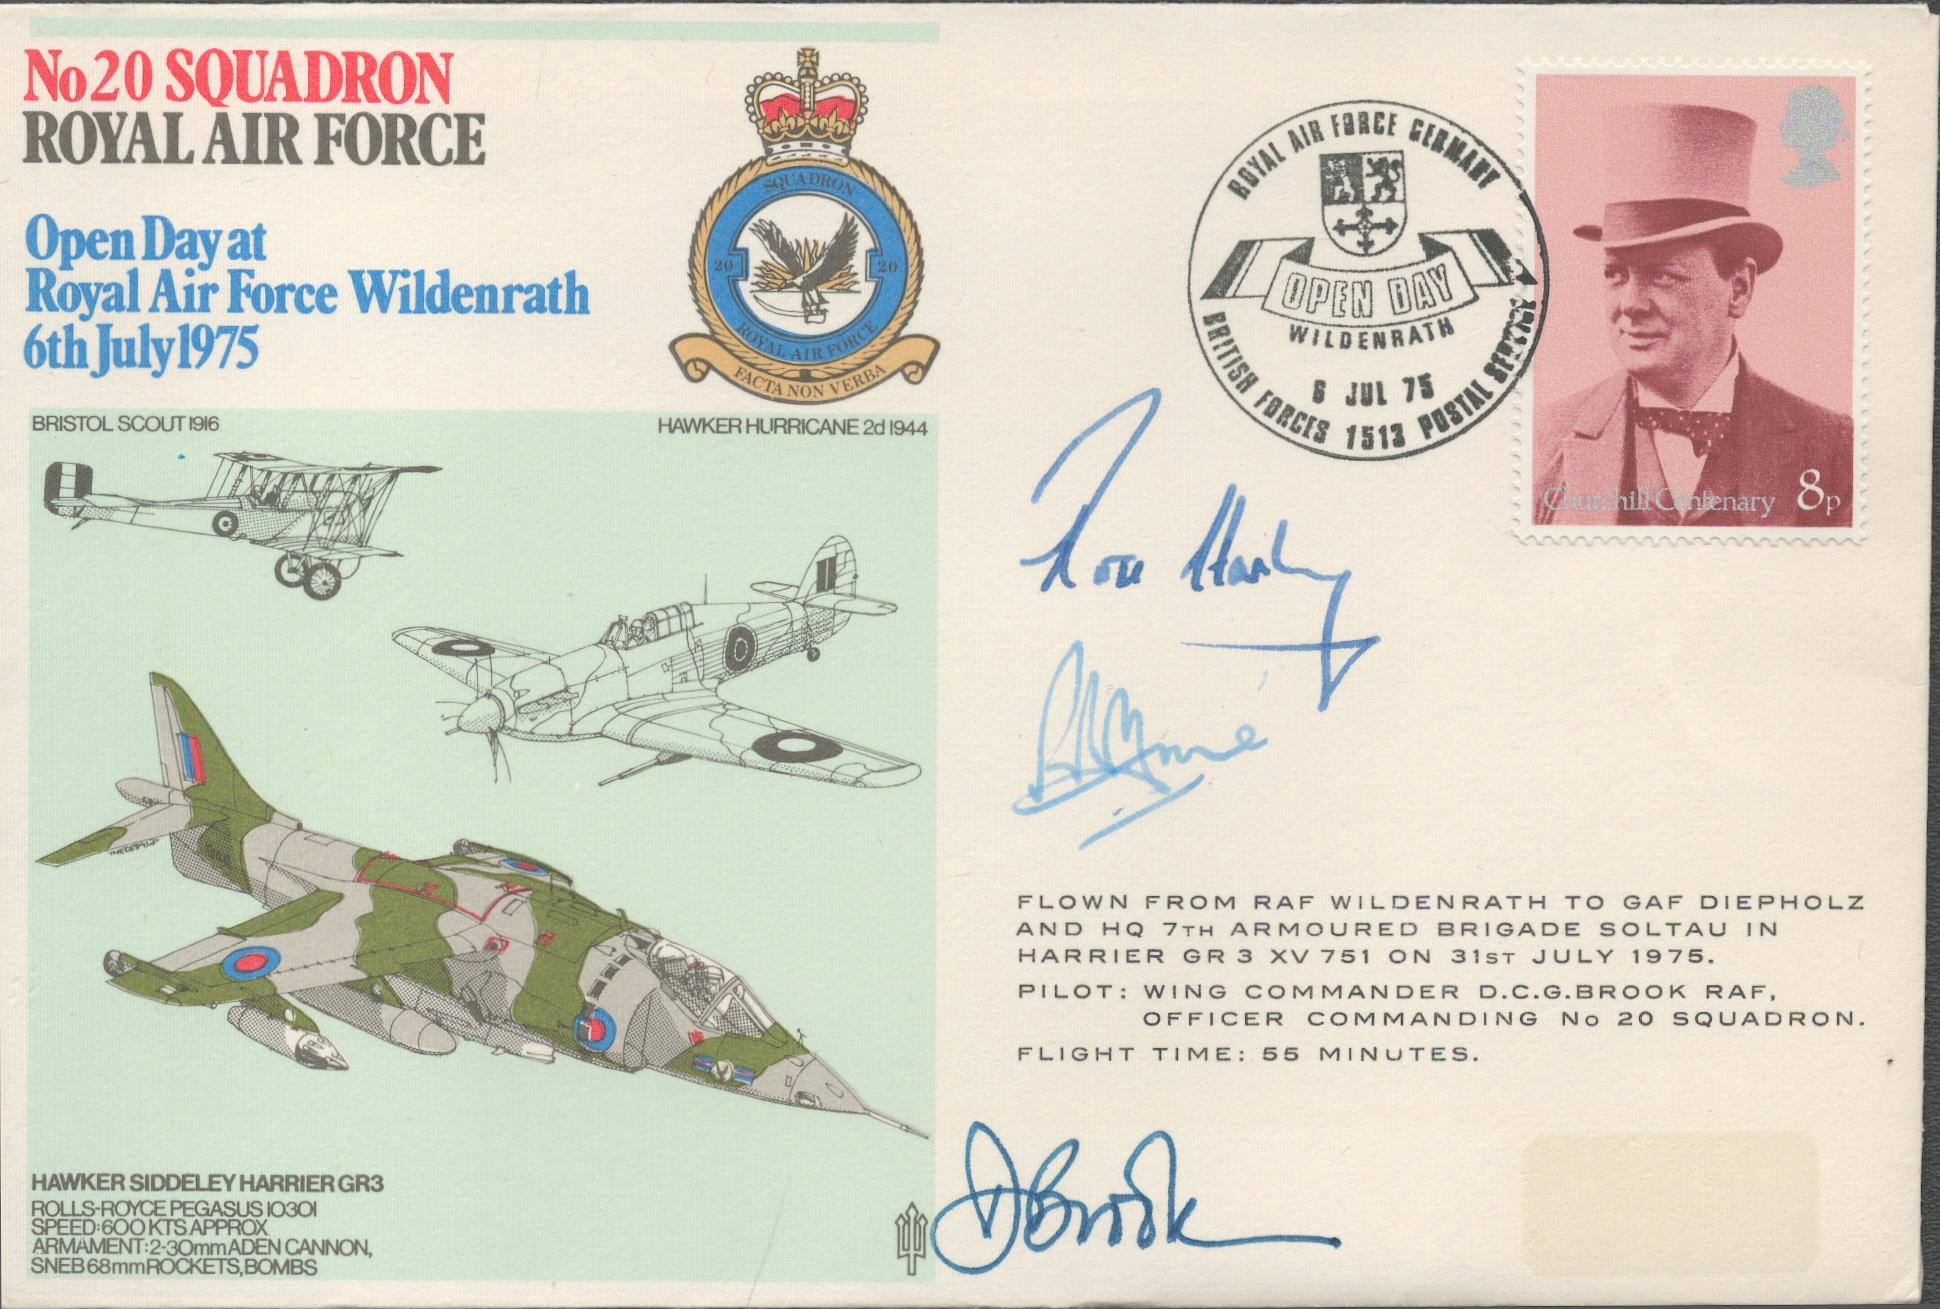 A No 20 Squadron RAF Commemorative Cover, an open day at Royal Air Force Wildenrath 6th July 1975.